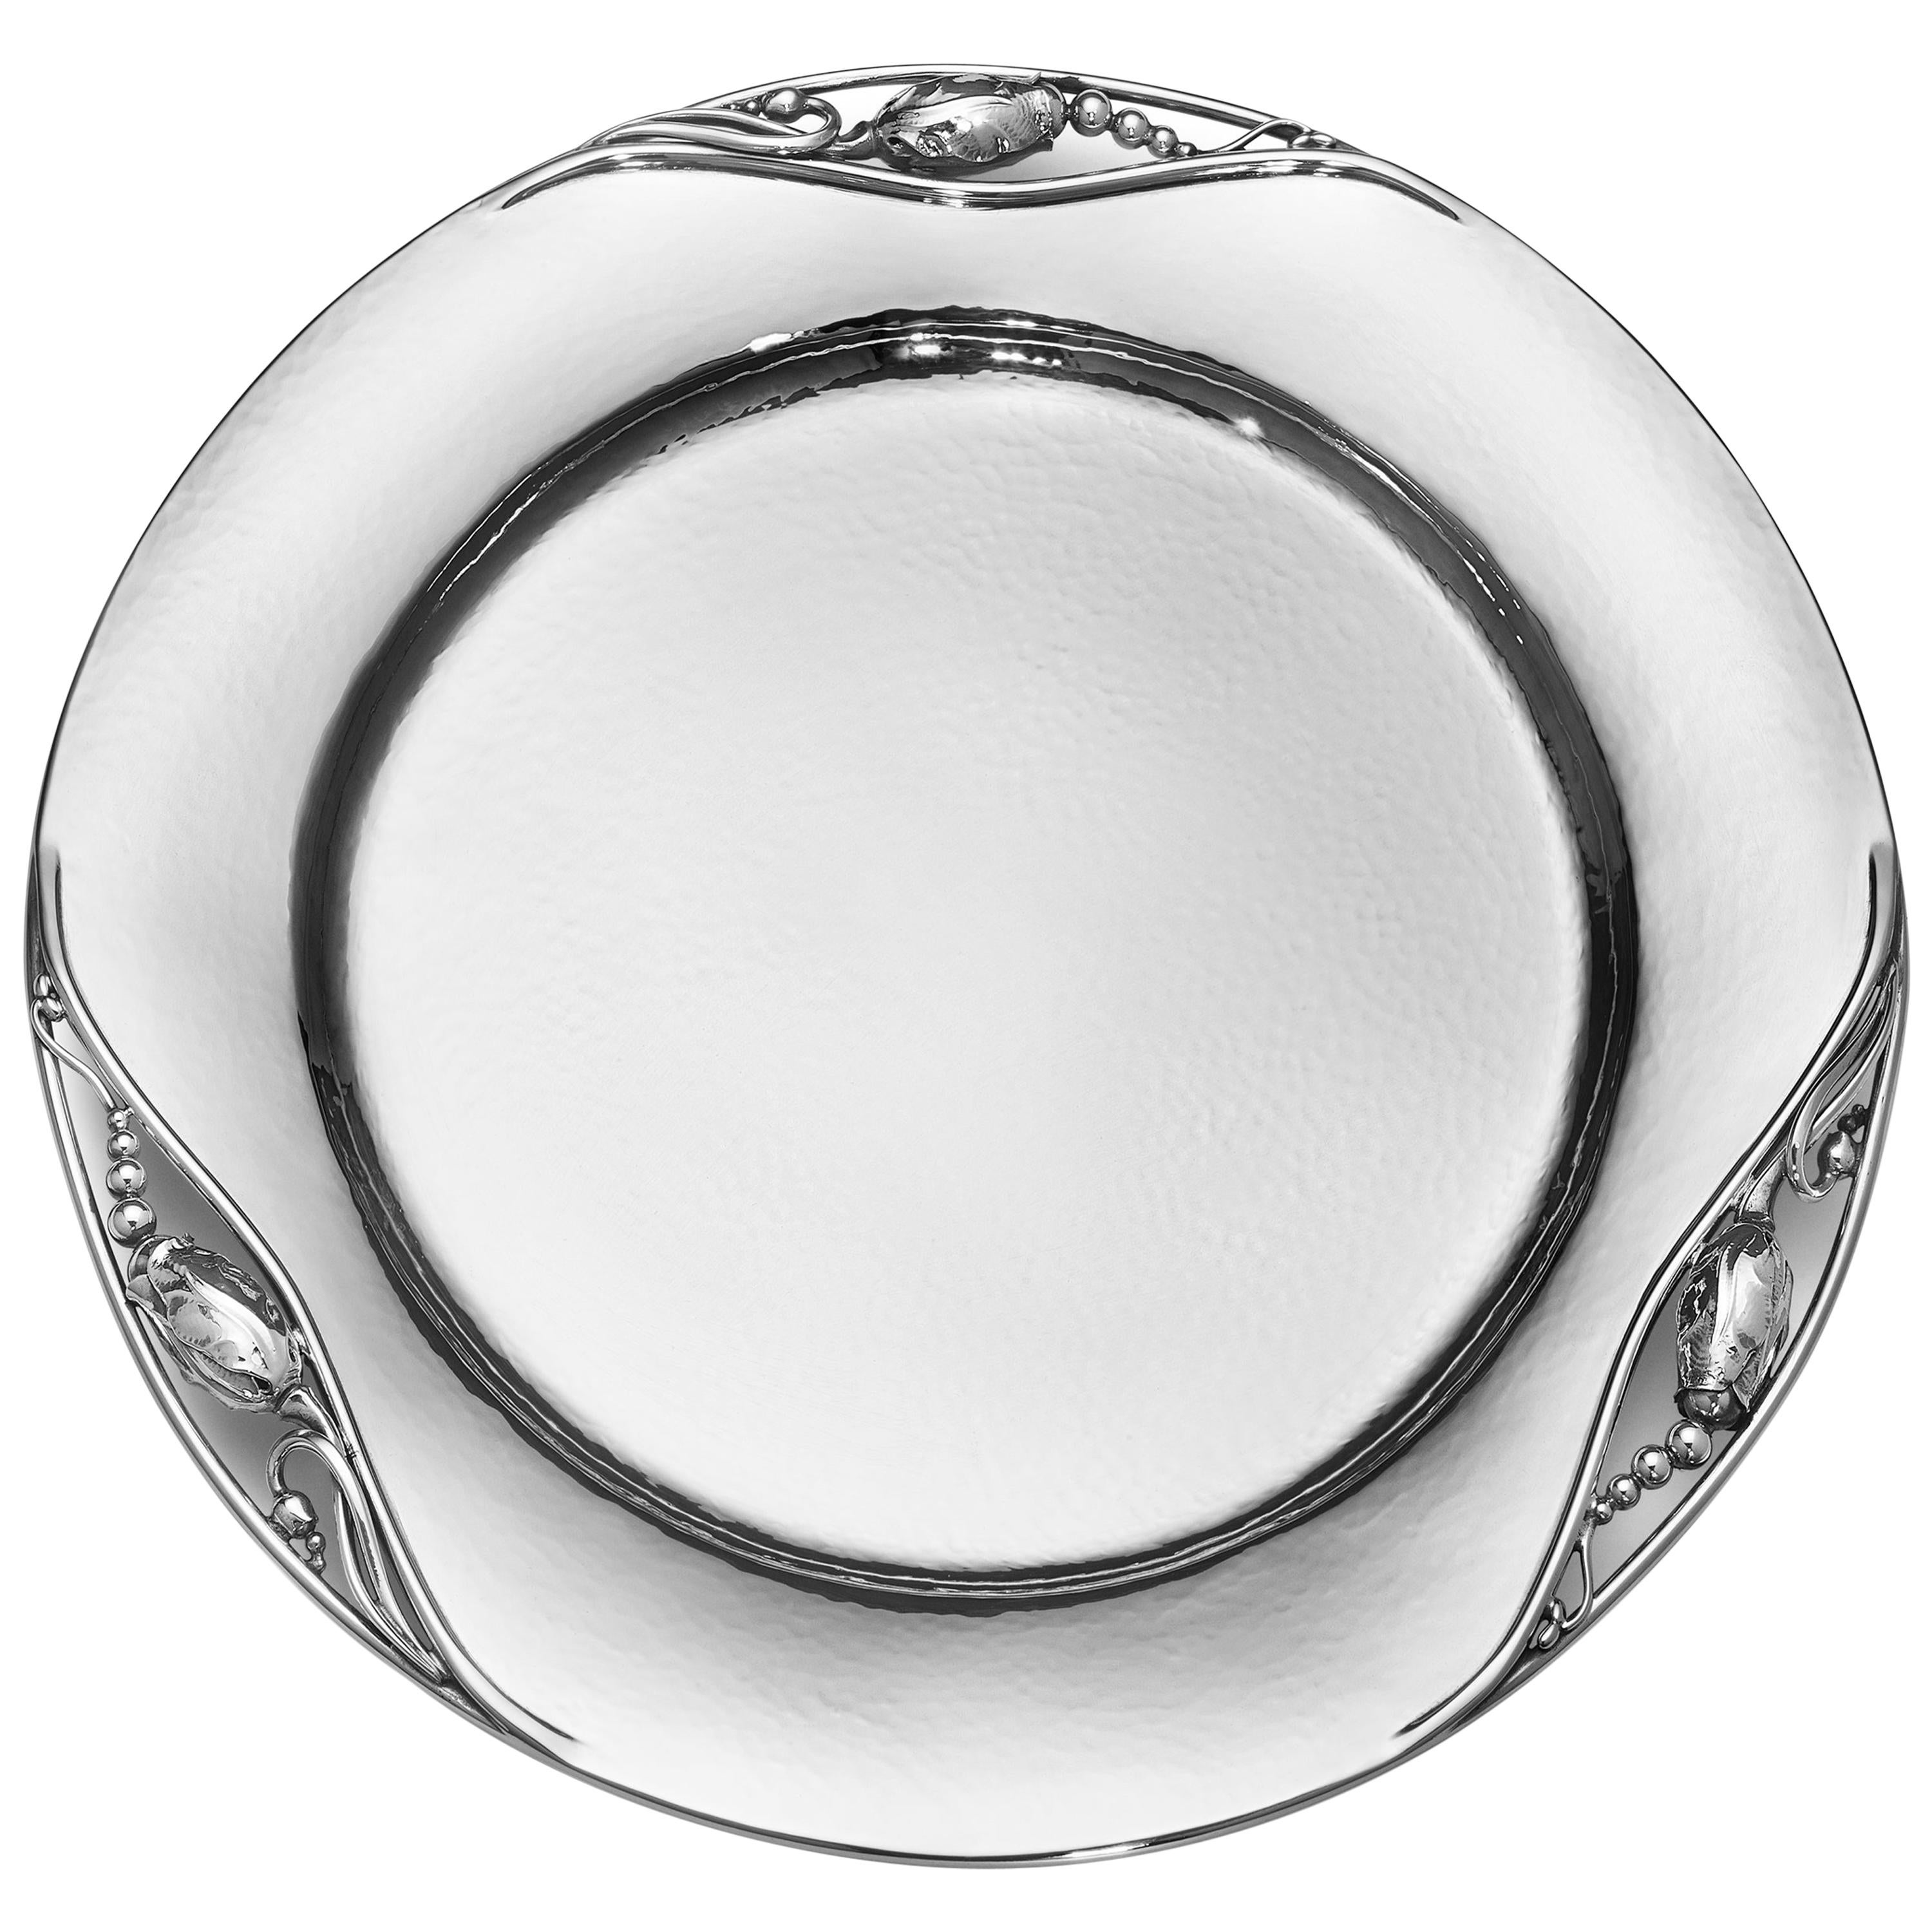 Georg Jensen 2Ac Handcrafted Sterling Silver Place Plate